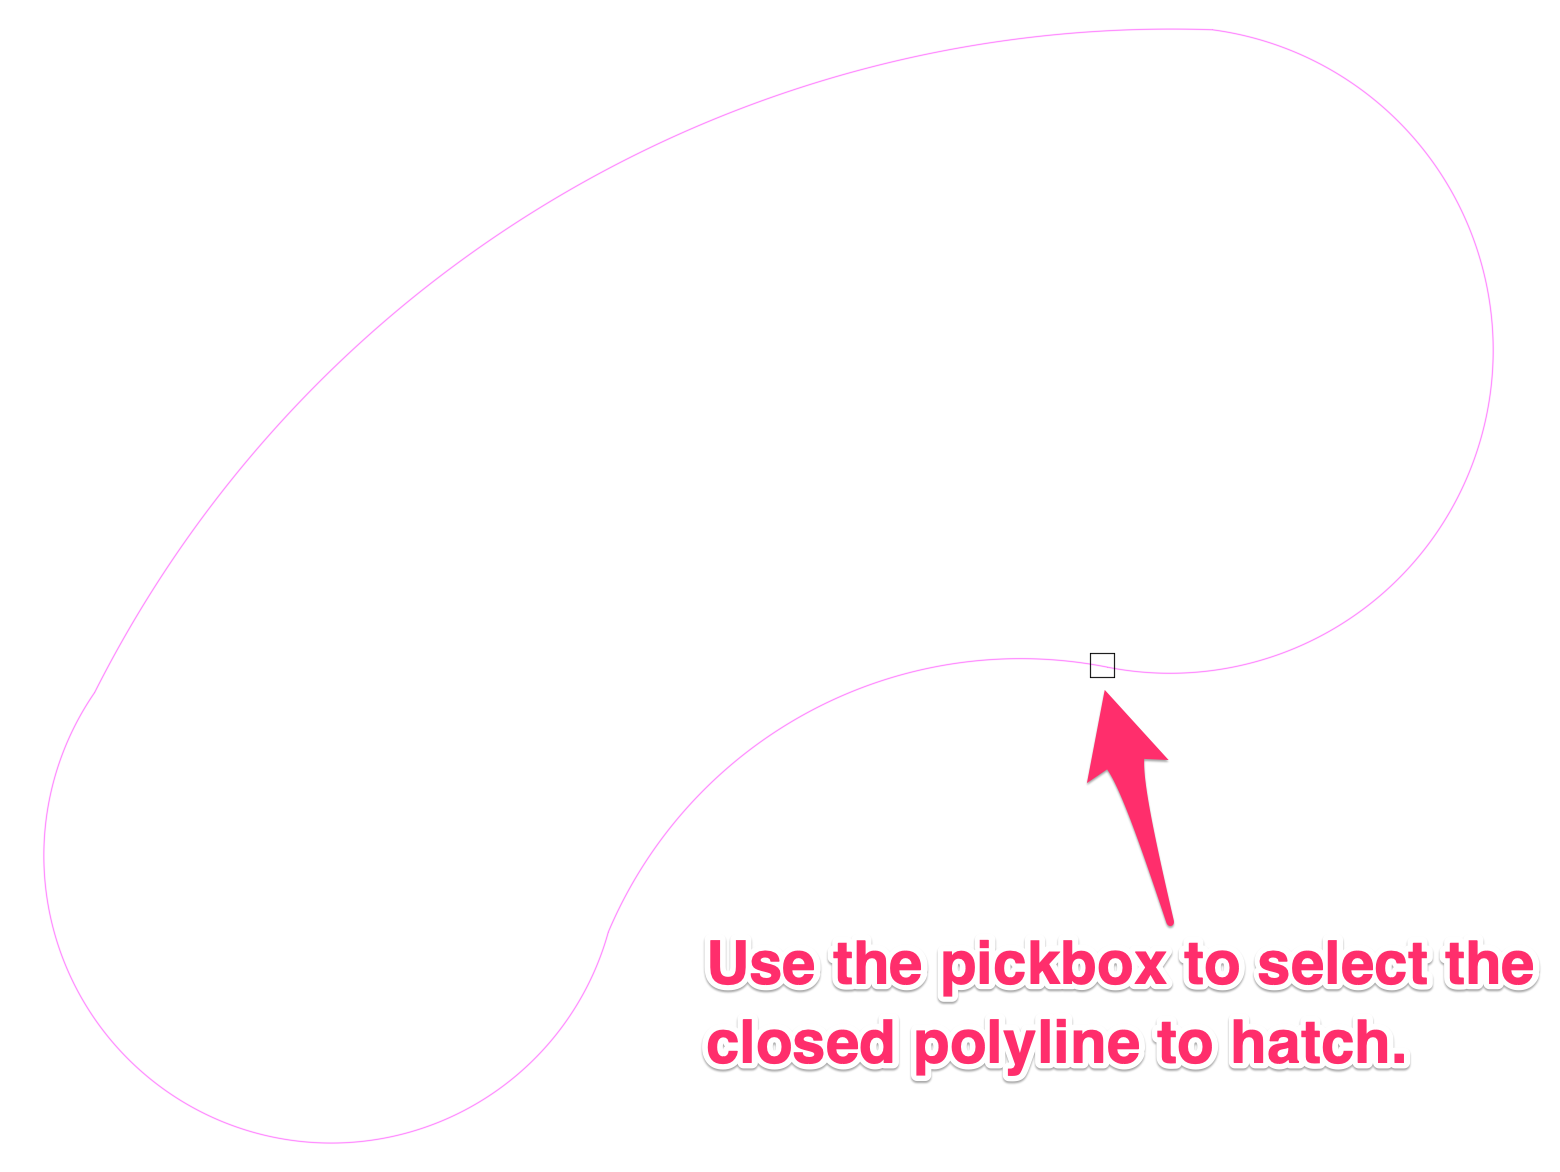 Closed polyline to hatch, example